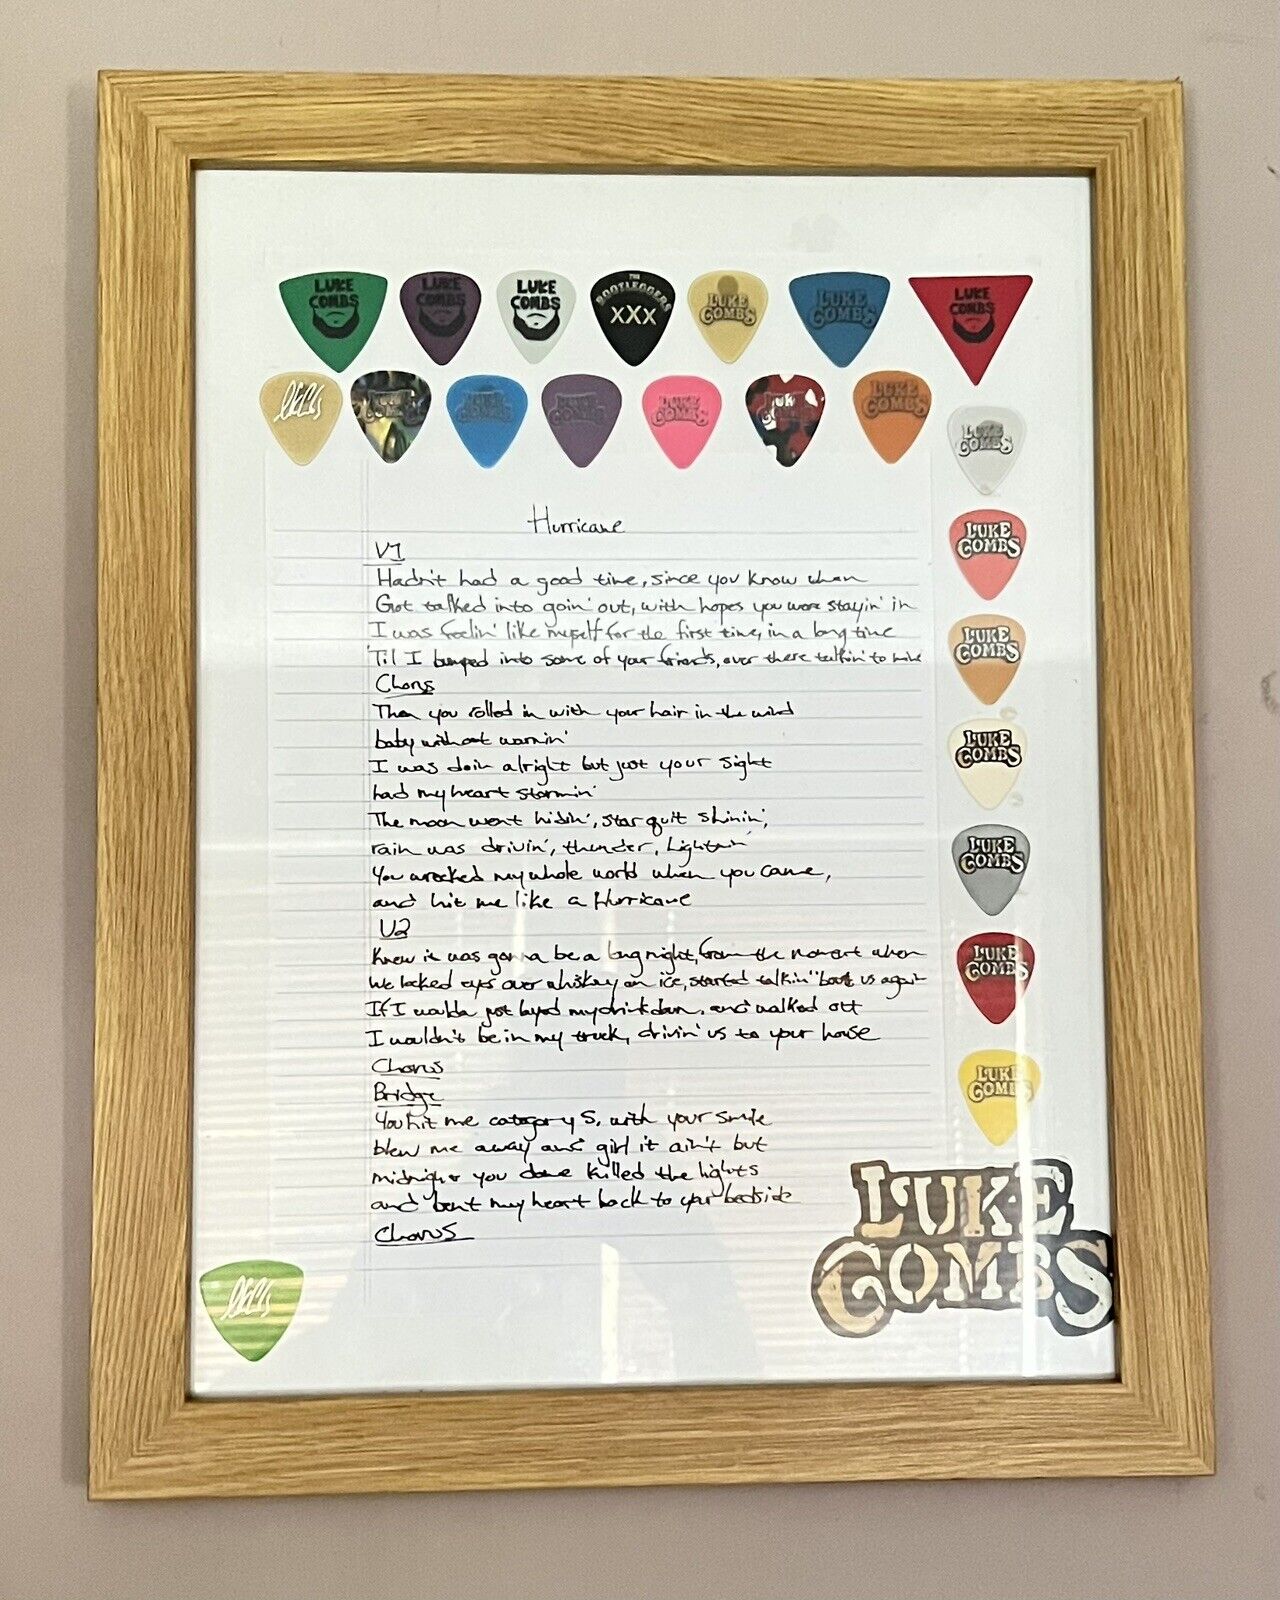 Luke Combs Guitar Pick Collection Plus Official Copy Of Lyrics From Meet/Greet